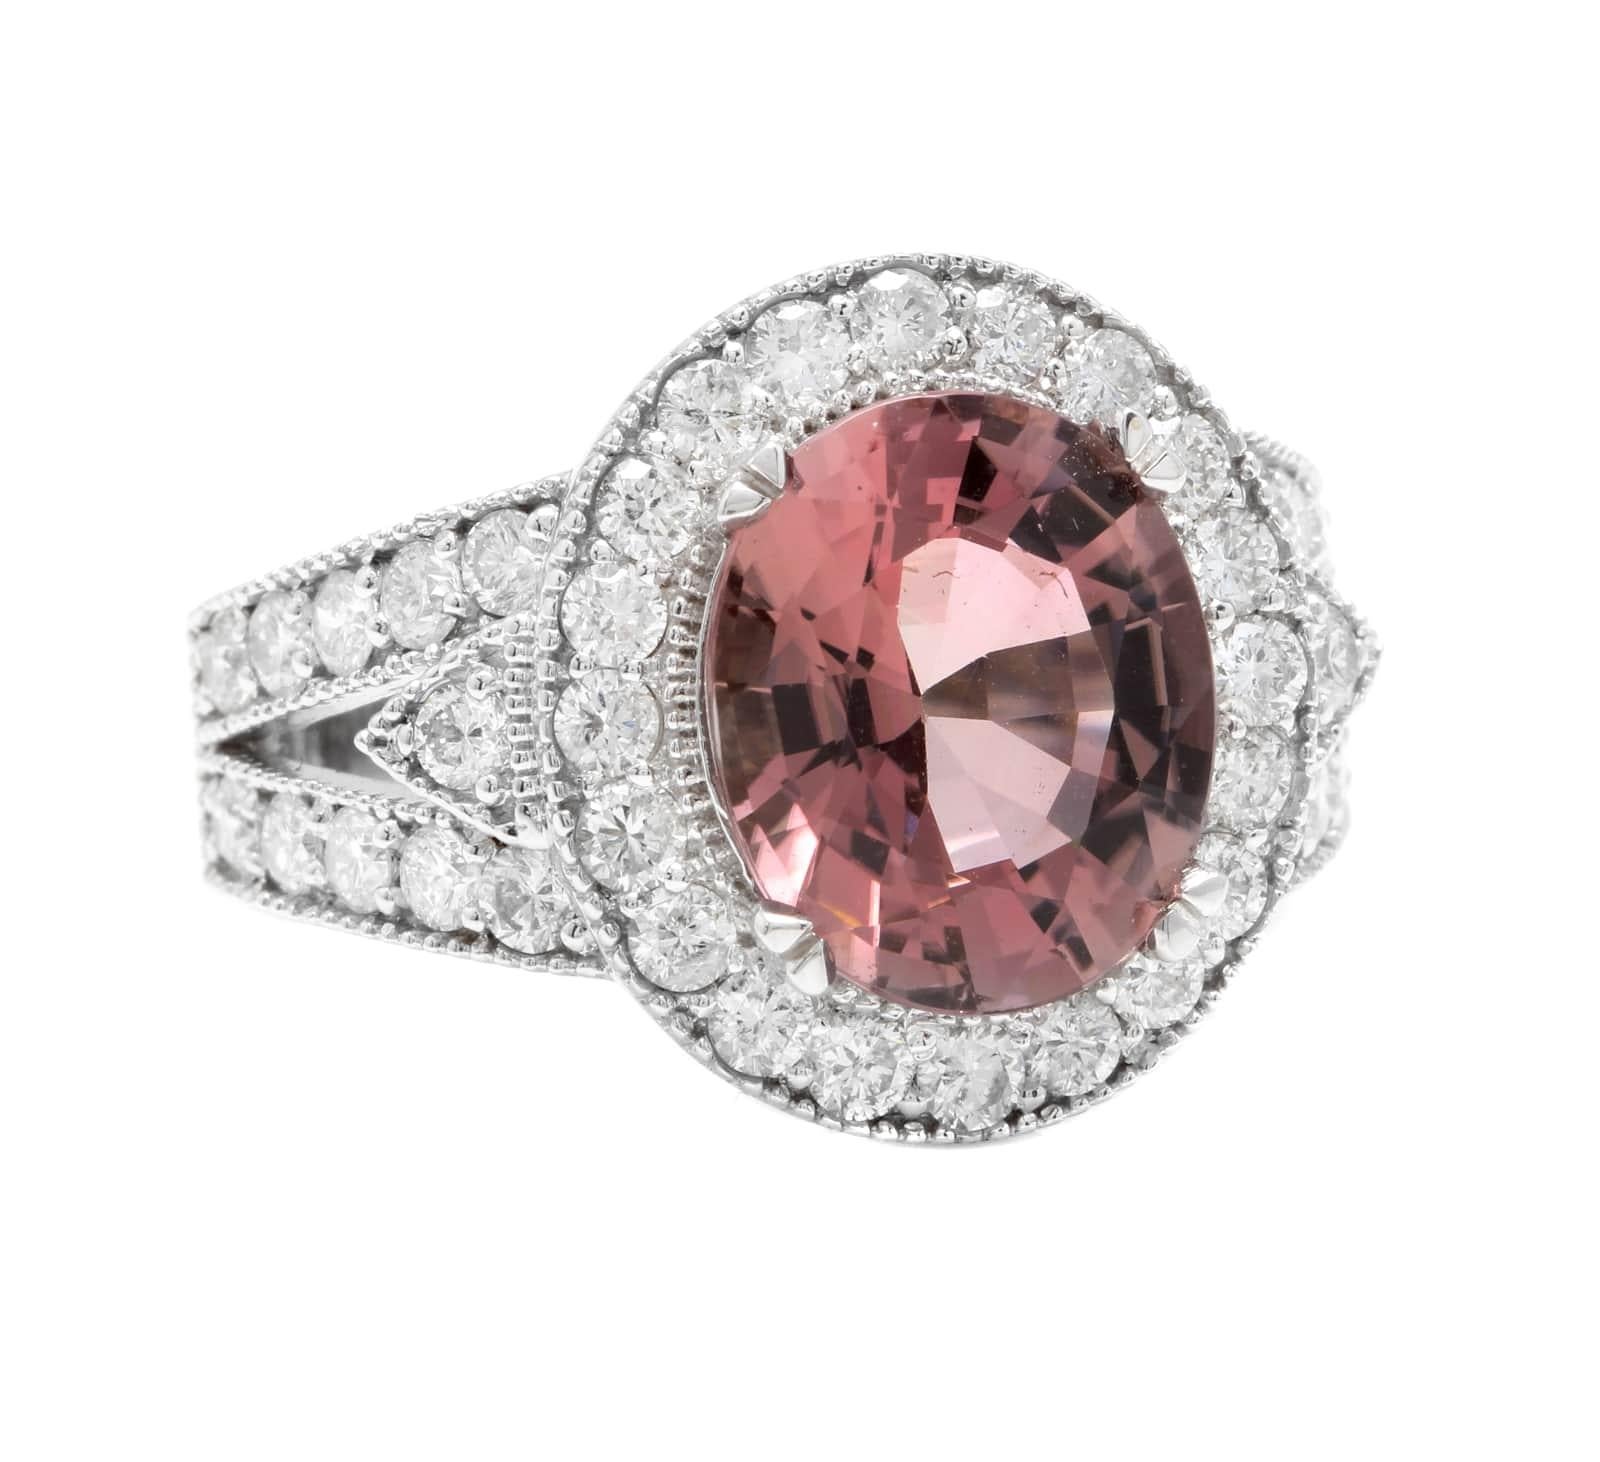 6.00 Carats Natural Very Nice Looking Tourmaline and Diamond 14K Solid White Gold Ring

Total Natural Oval Cut Tourmaline Weight is: Approx. 4.50 Carats

Tourmaline Measures: Approx. 12.00 x 10.00mm

Natural Round Diamonds Weight: Approx. 1.50